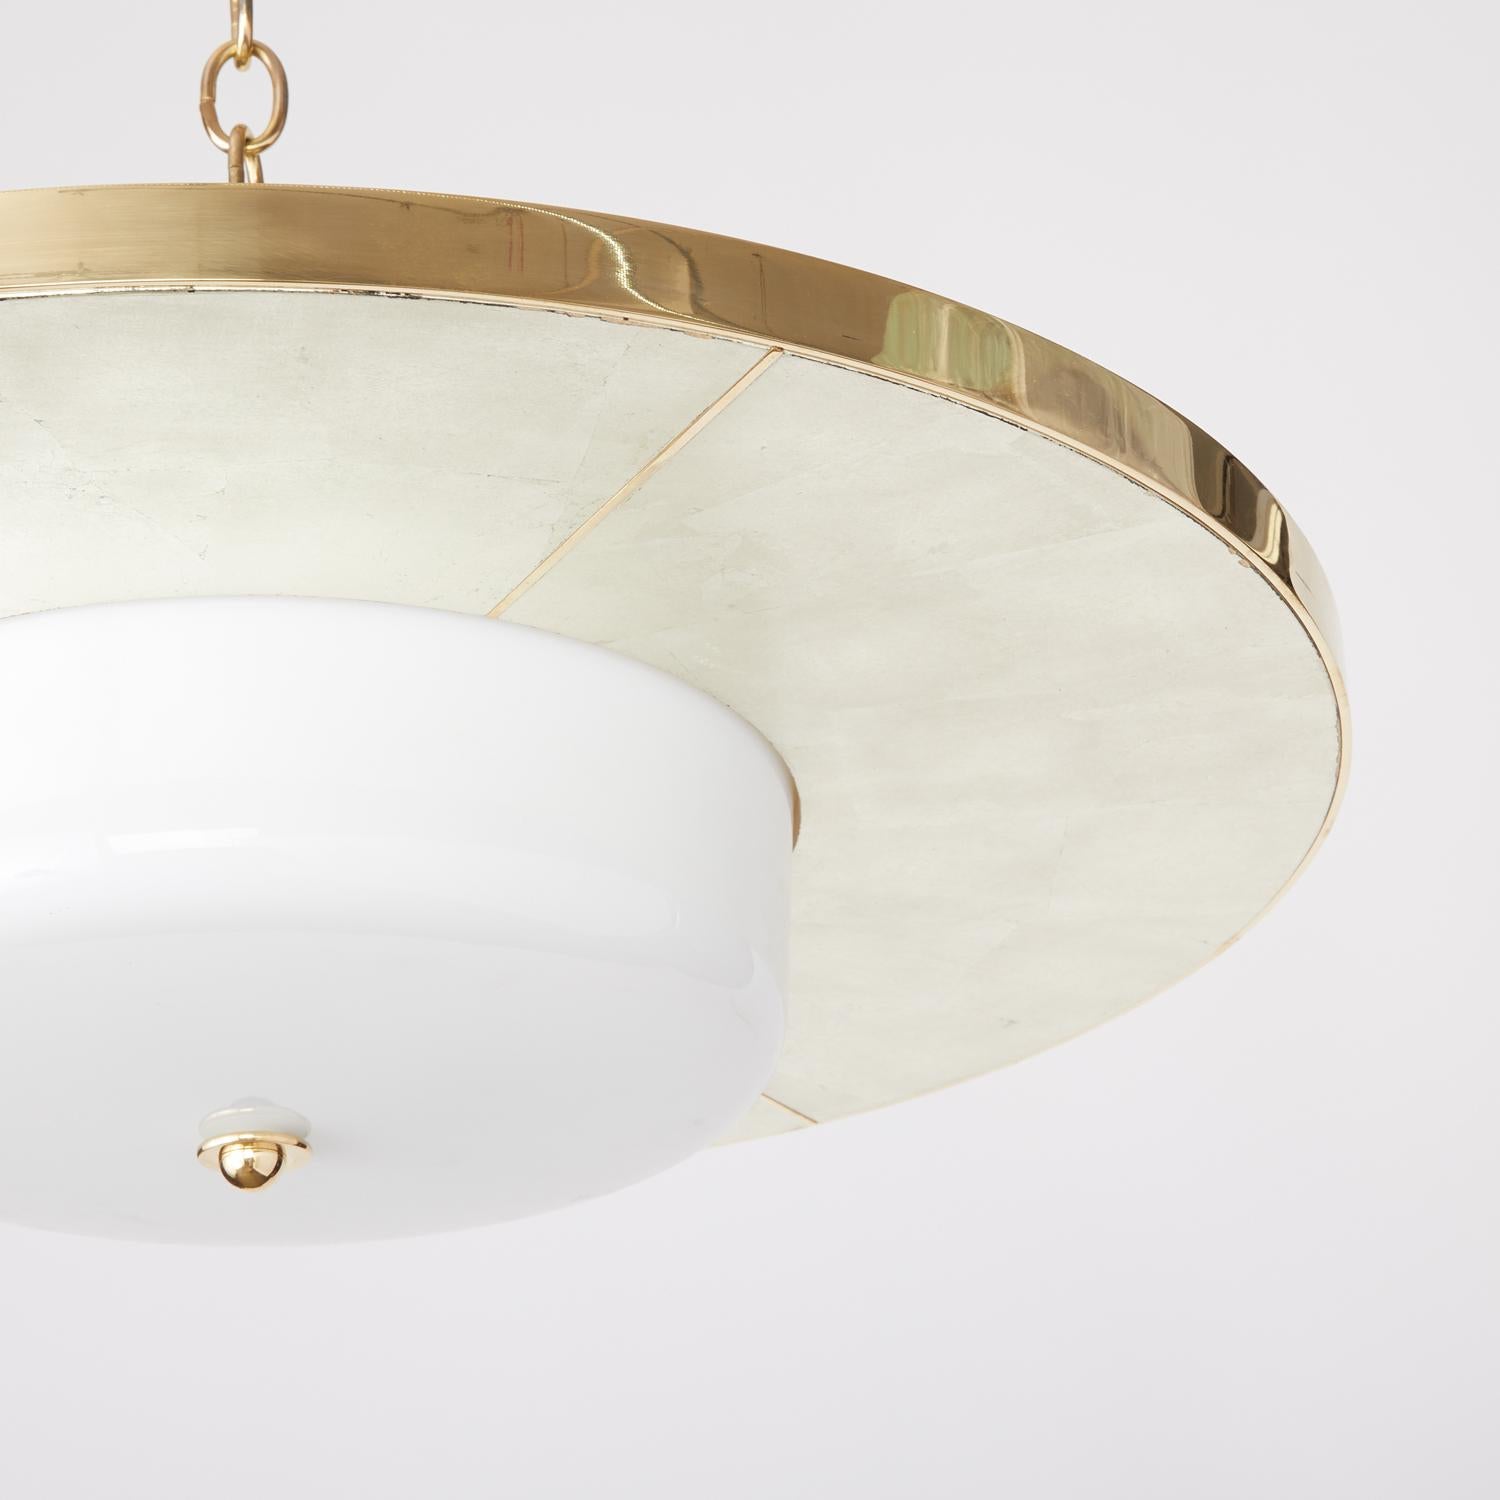 A custom, Art Deco style flush mounted light fixture inspired by the Swedish Grace Period. This vibrant fixture features a white gold leaf frame with polished brass details and a white glass shade. A custom design by David Duncan Lighting.